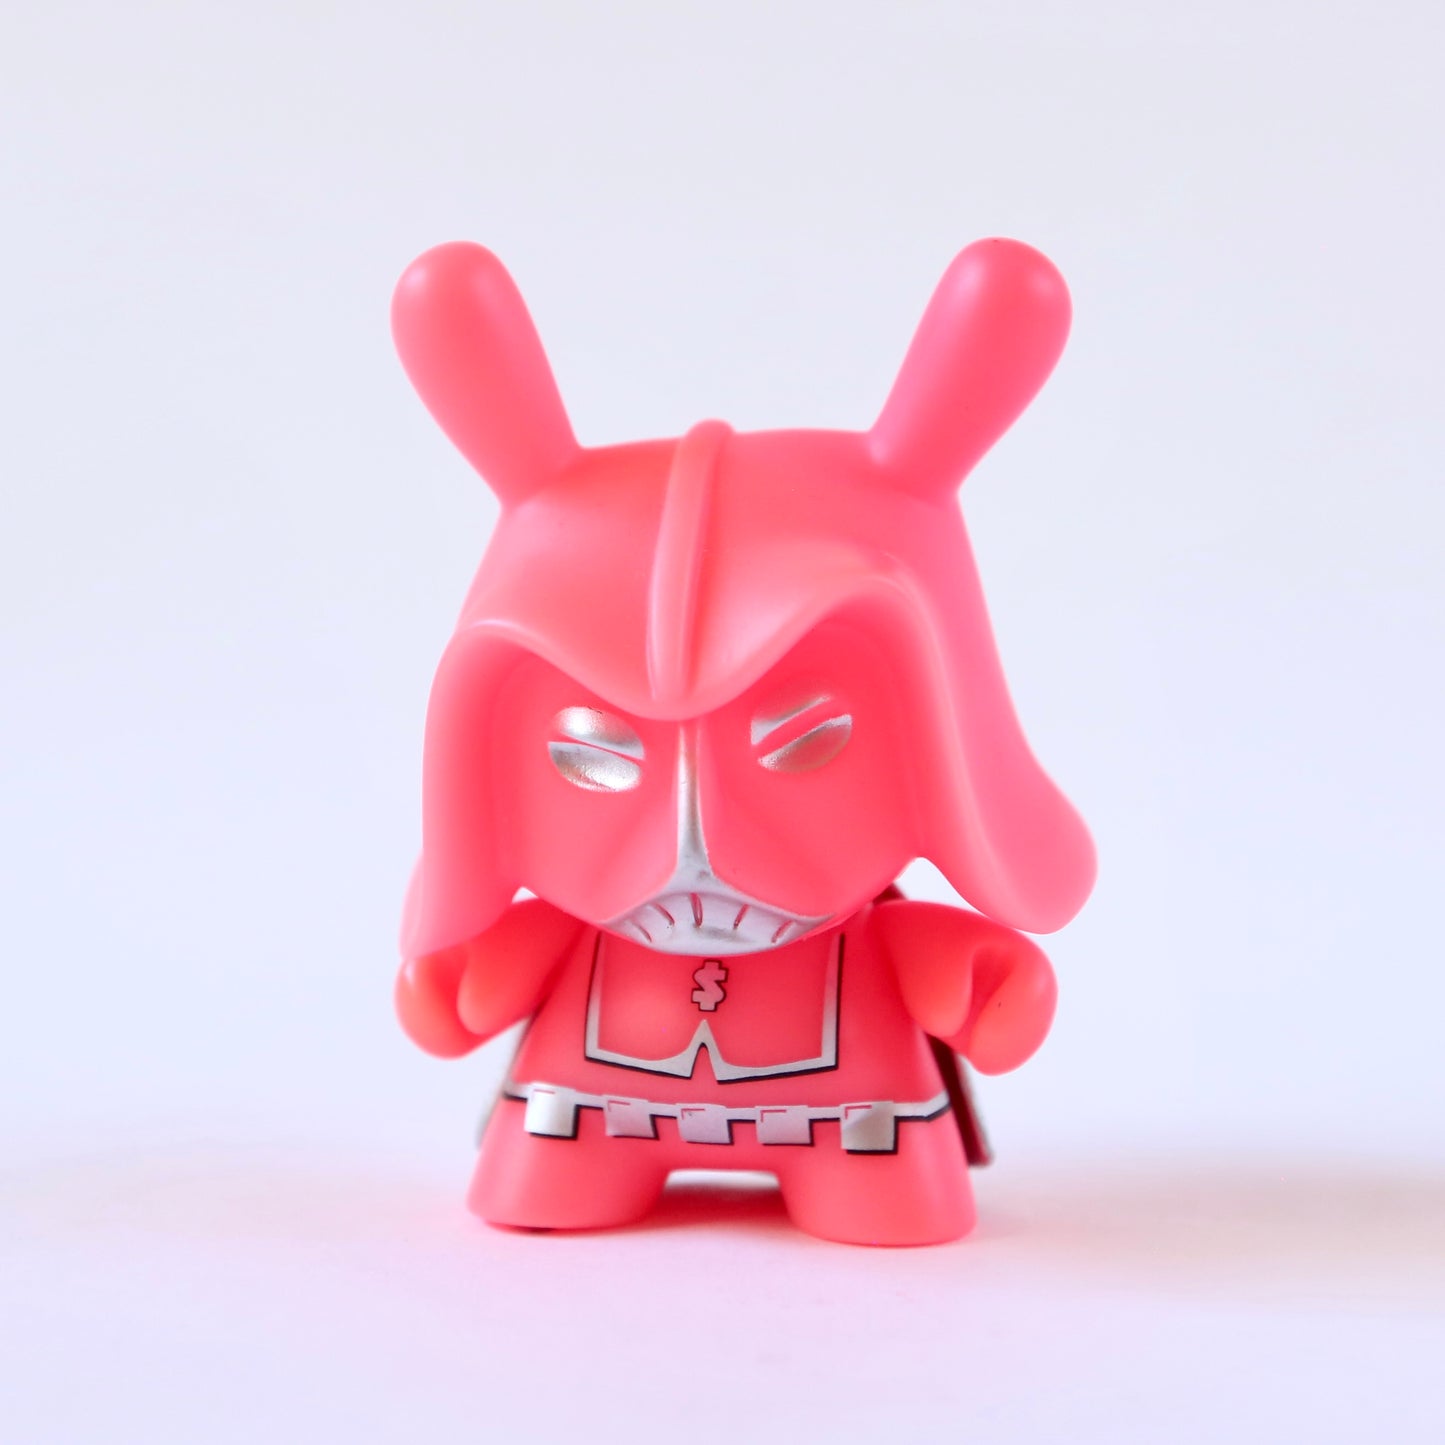 "Suckadelic Overmaster Supreme" 3in Dunny by Sucklord x Kidrobot